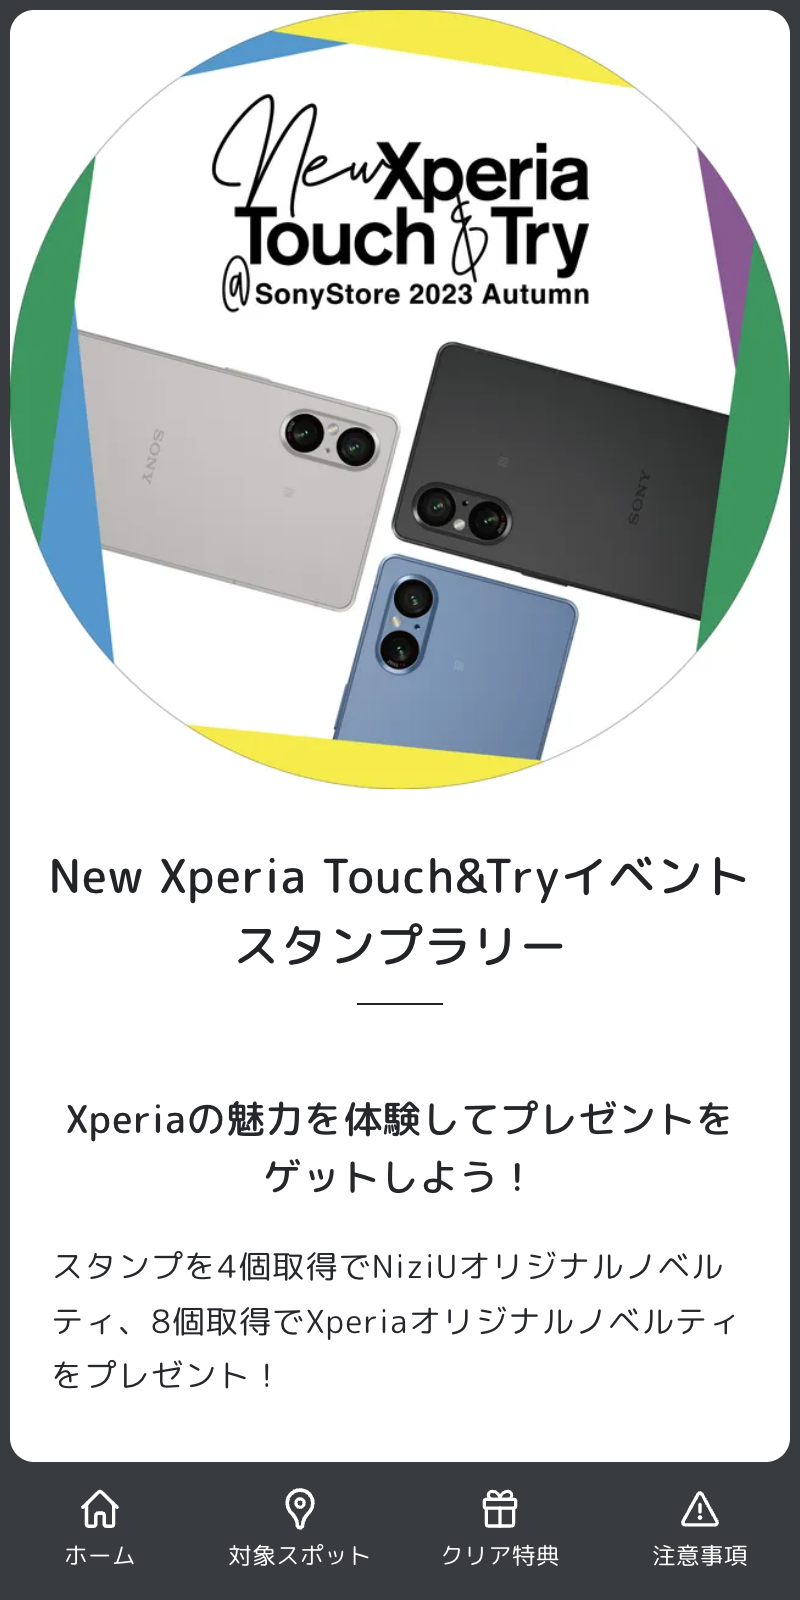 New Xperia Touch&Tryラリー2023のスクリーンショット 1